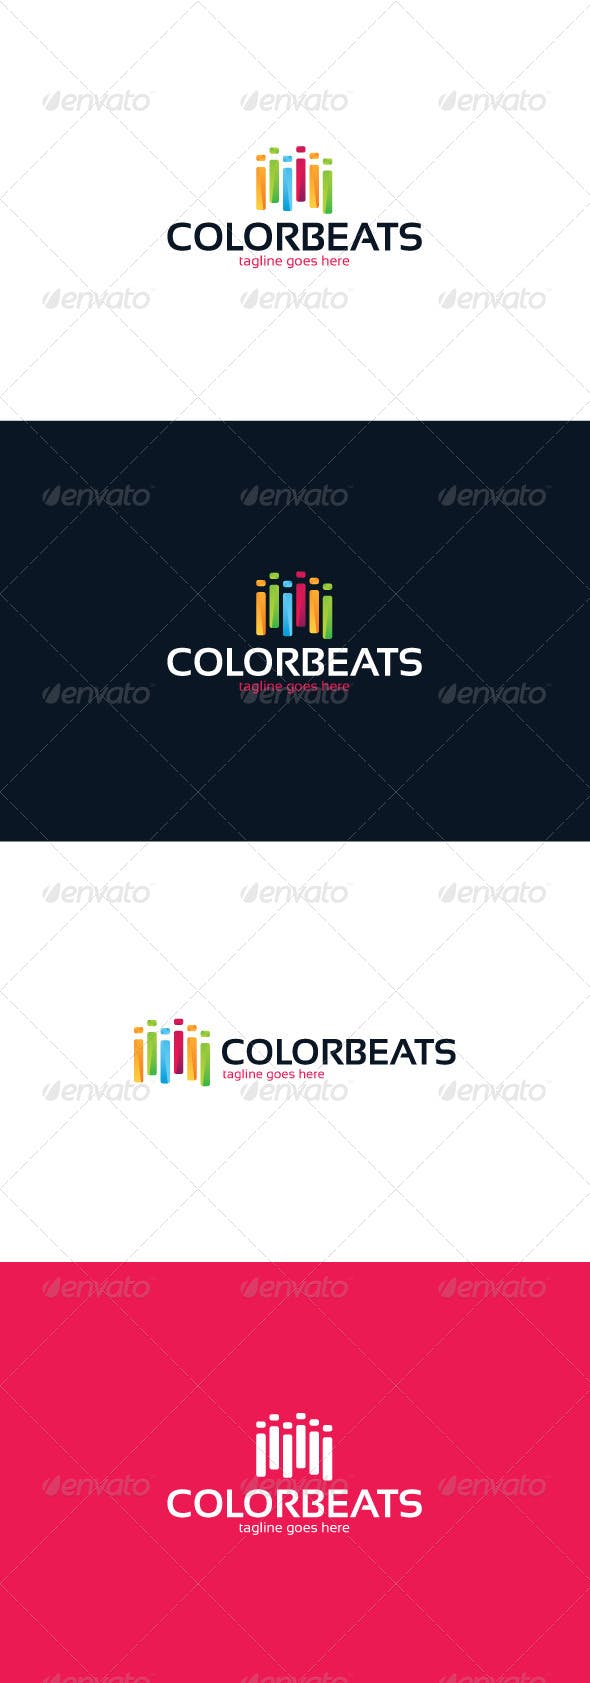 Colored Beats Logo - Color Beats Logo by shaoleen | GraphicRiver